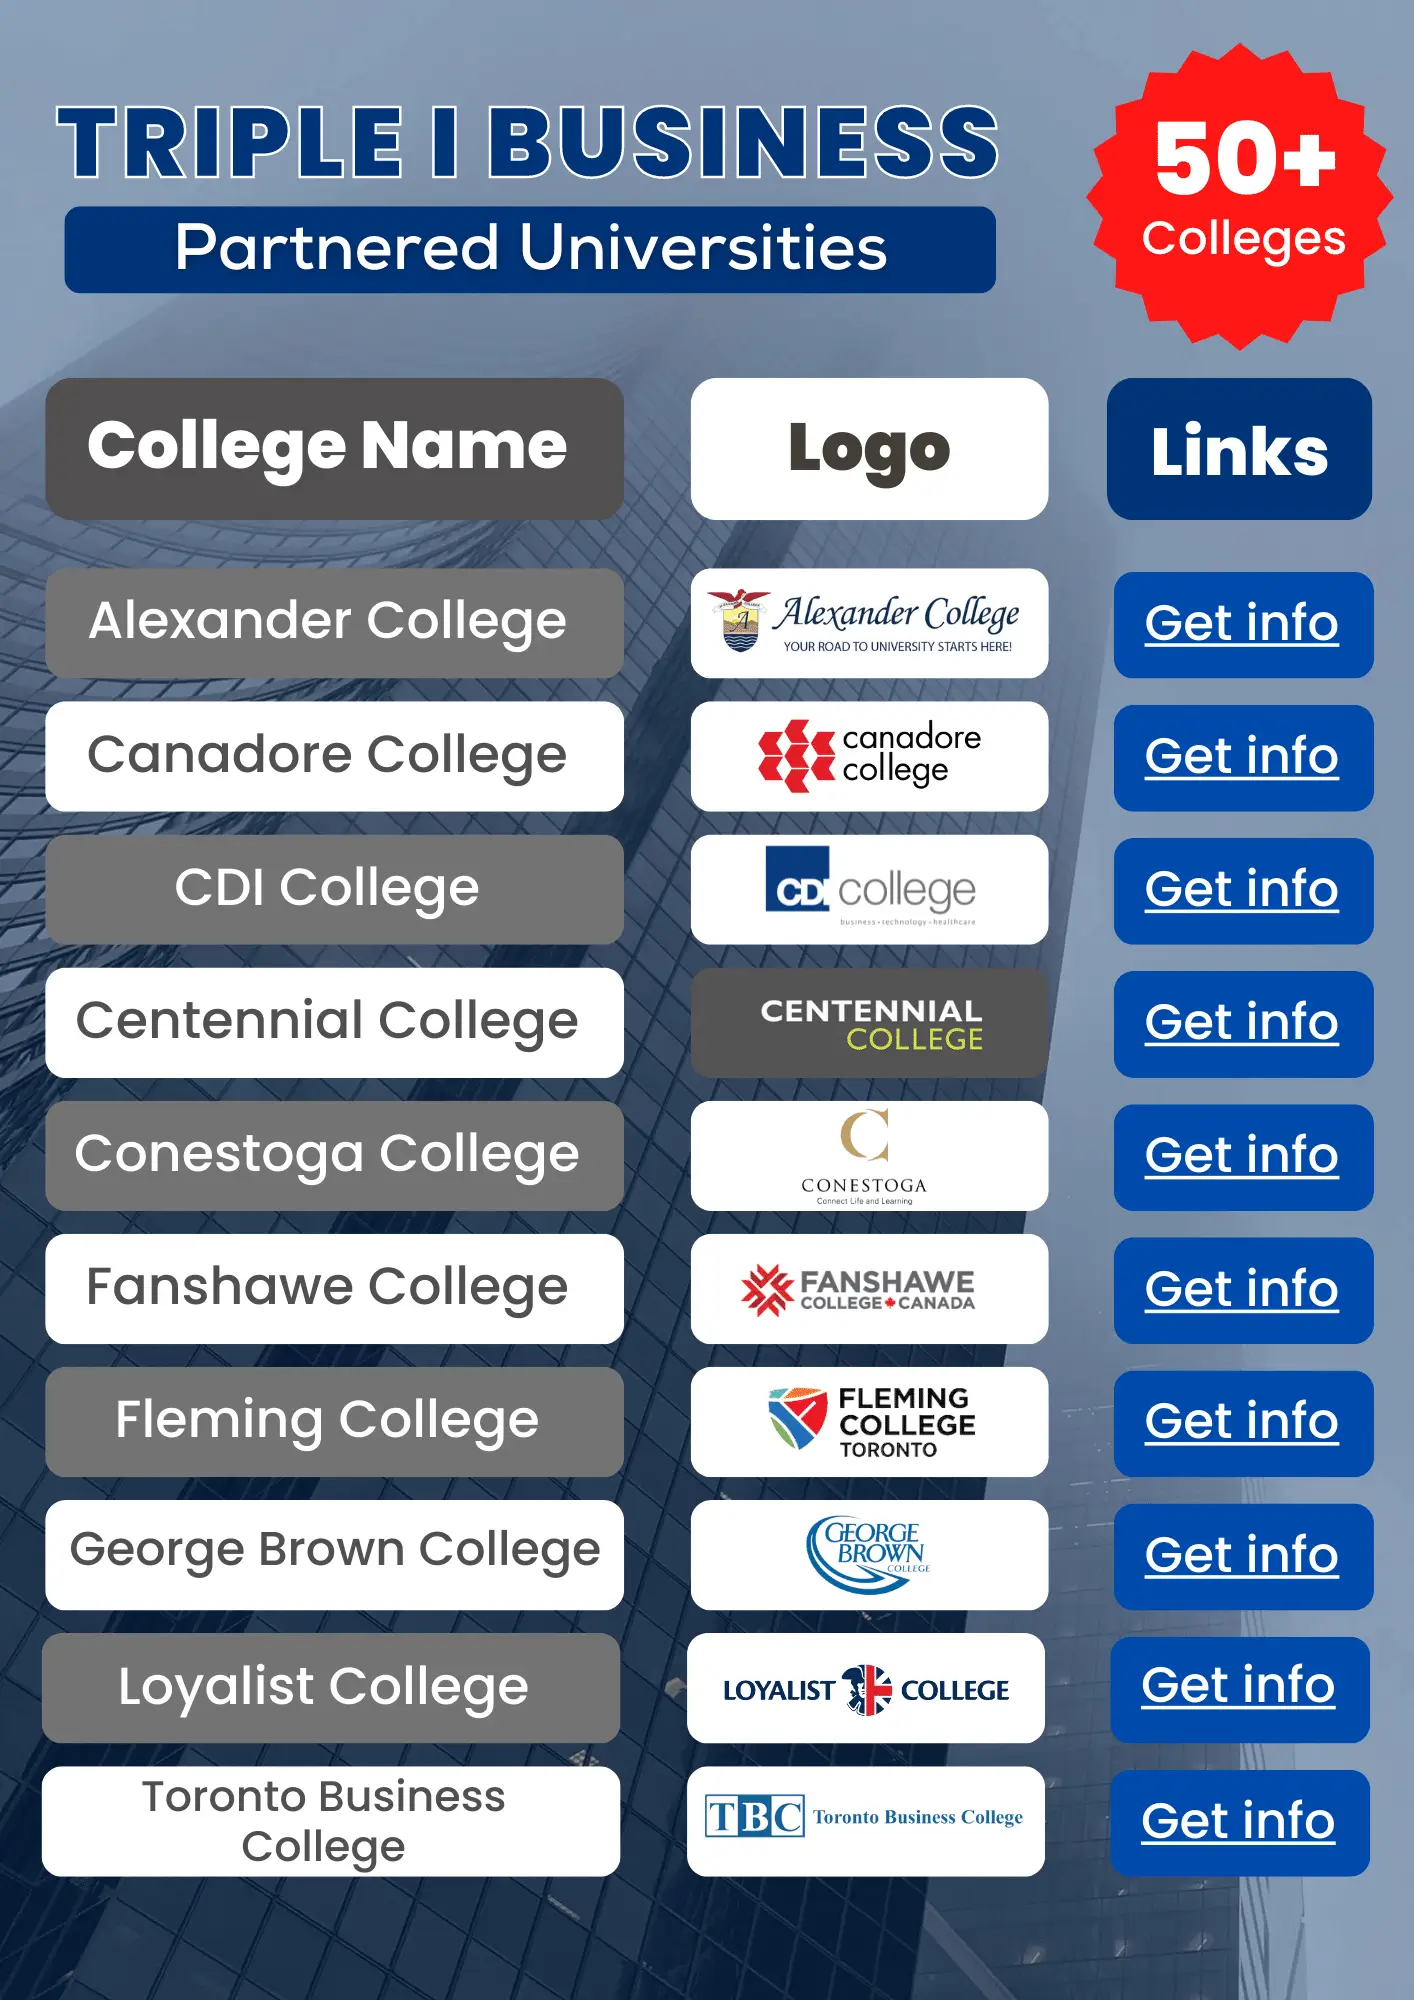 List of Top 10 colleges in Canada